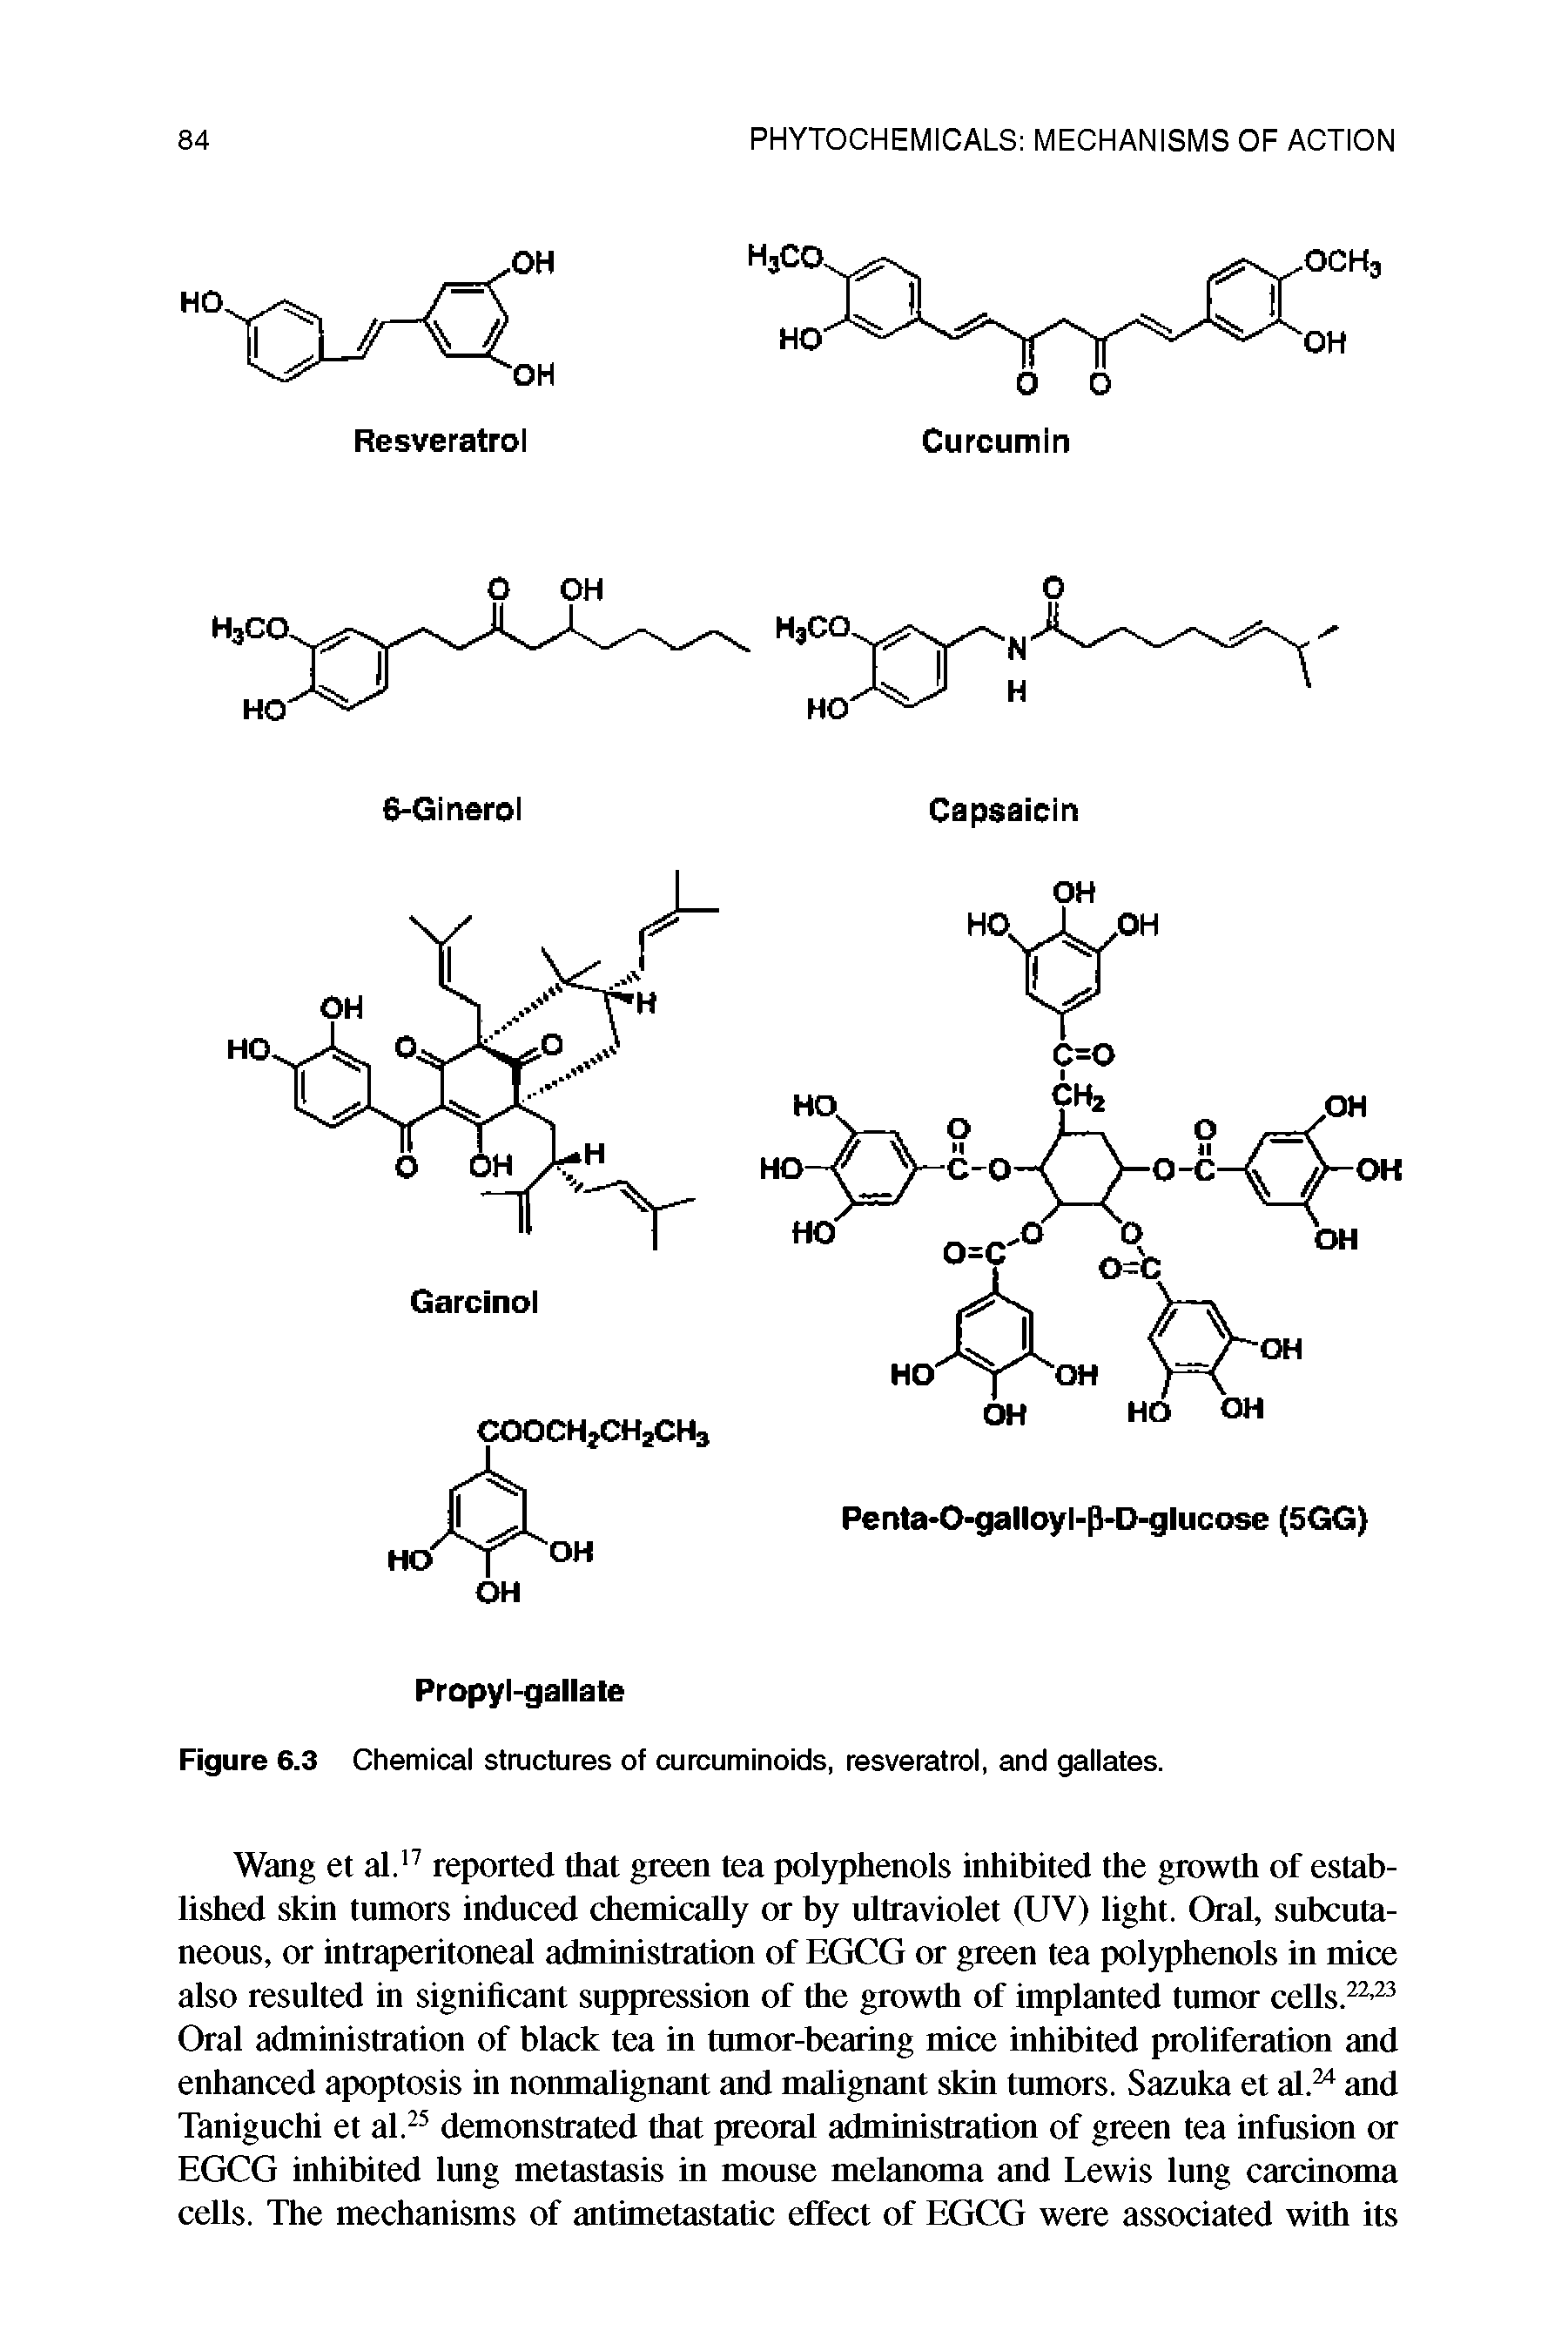 Figure 6.3 Chemical structures of curcuminoids, resveratrol, and gallates.